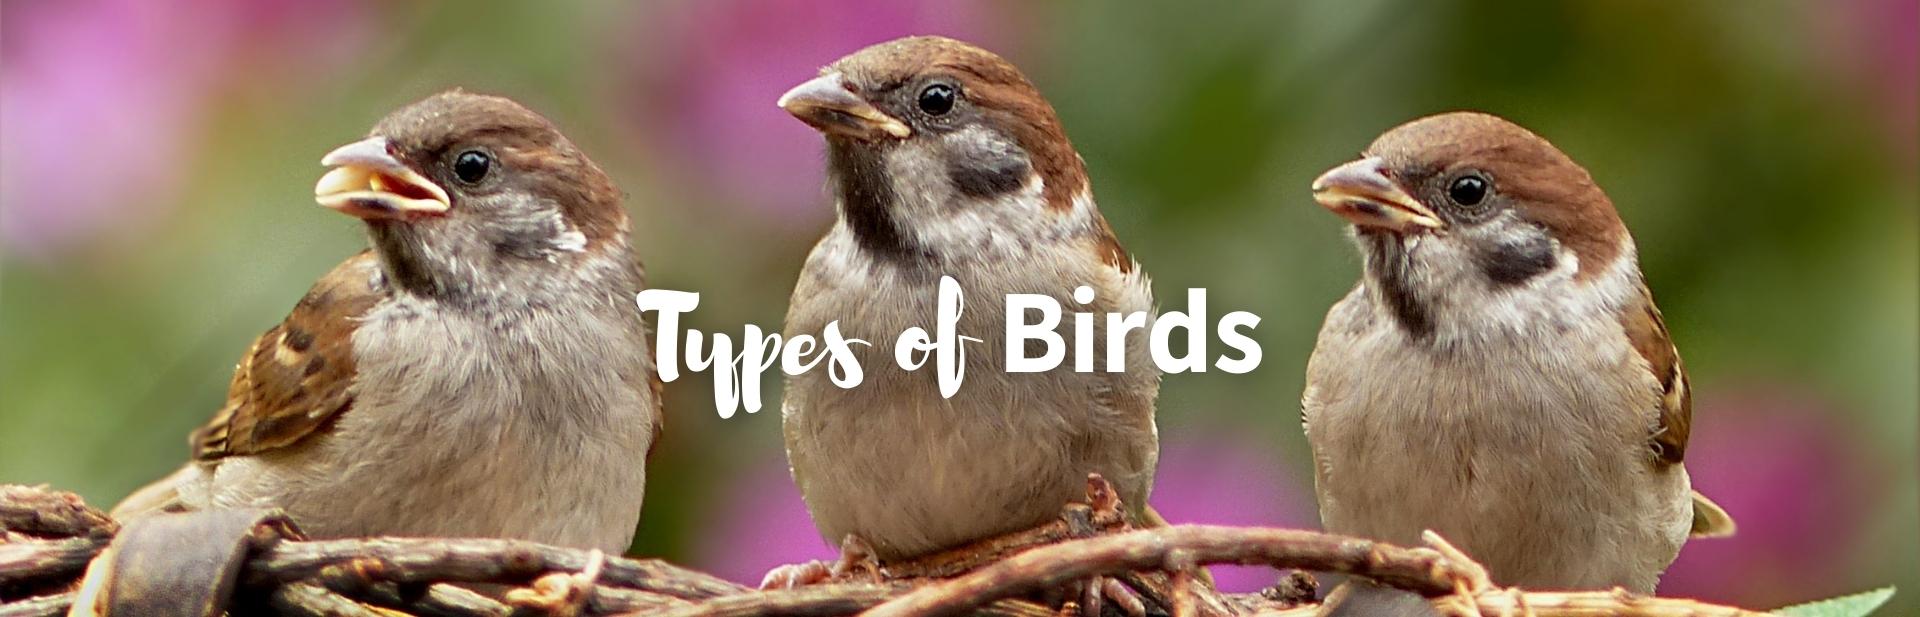 40 Different Types of Birds Across The World: Photos + Facts